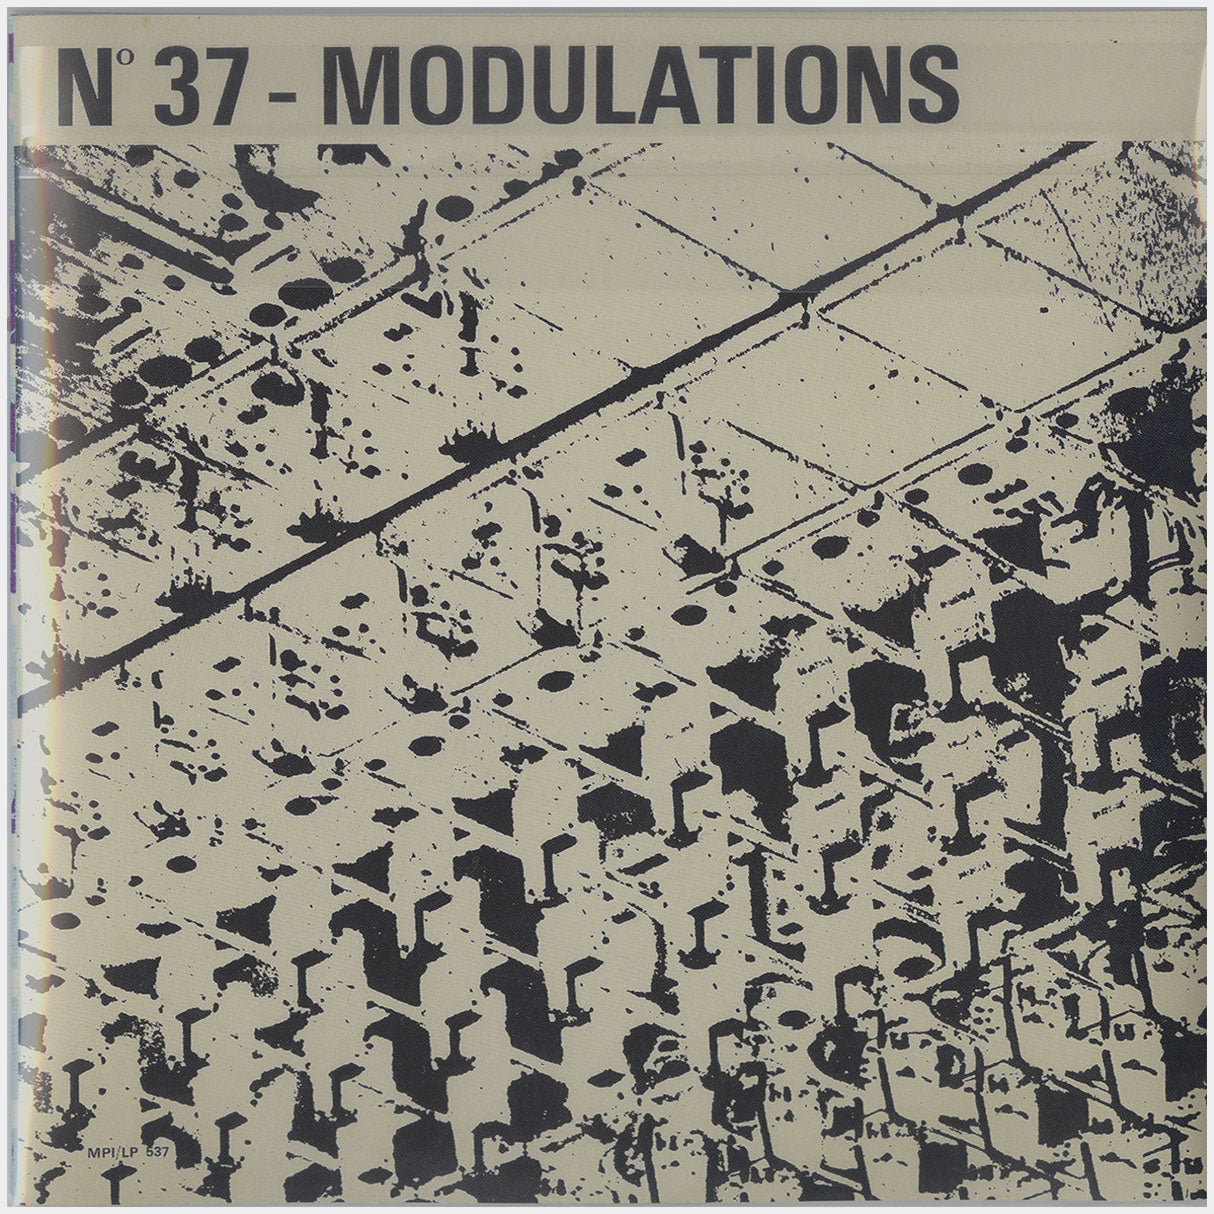 [CP 066 CD] H. Tical; Impact, Synthesized Sound and Music, Nº 37 - Modulations